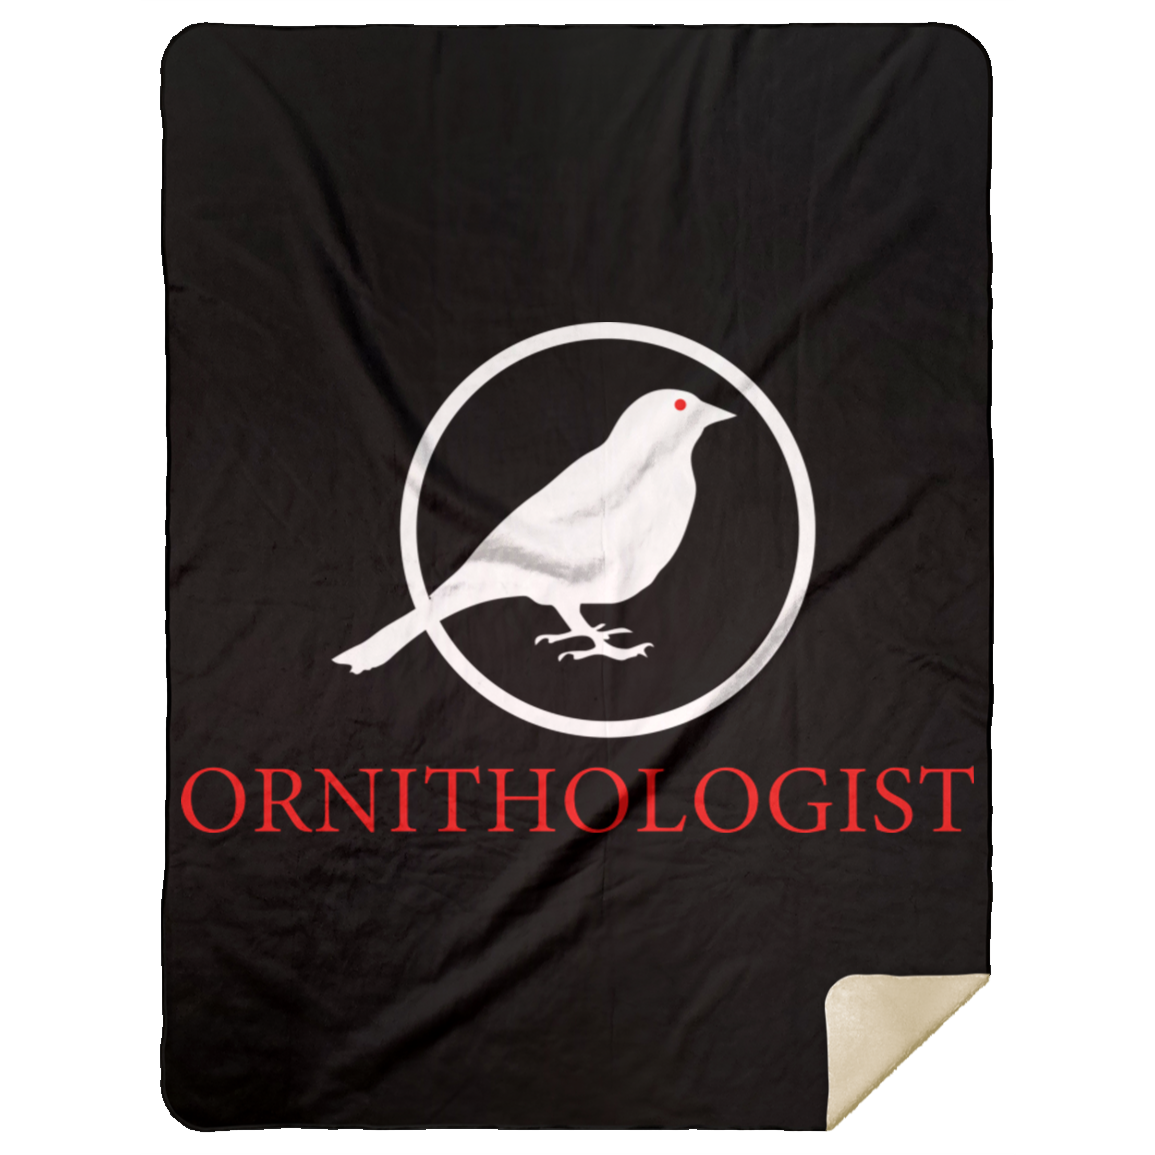 OPG Custom Design #24. Ornithologist. A person who studies or is an expert on birds. Premium Mink Sherpa Blanket 60x80